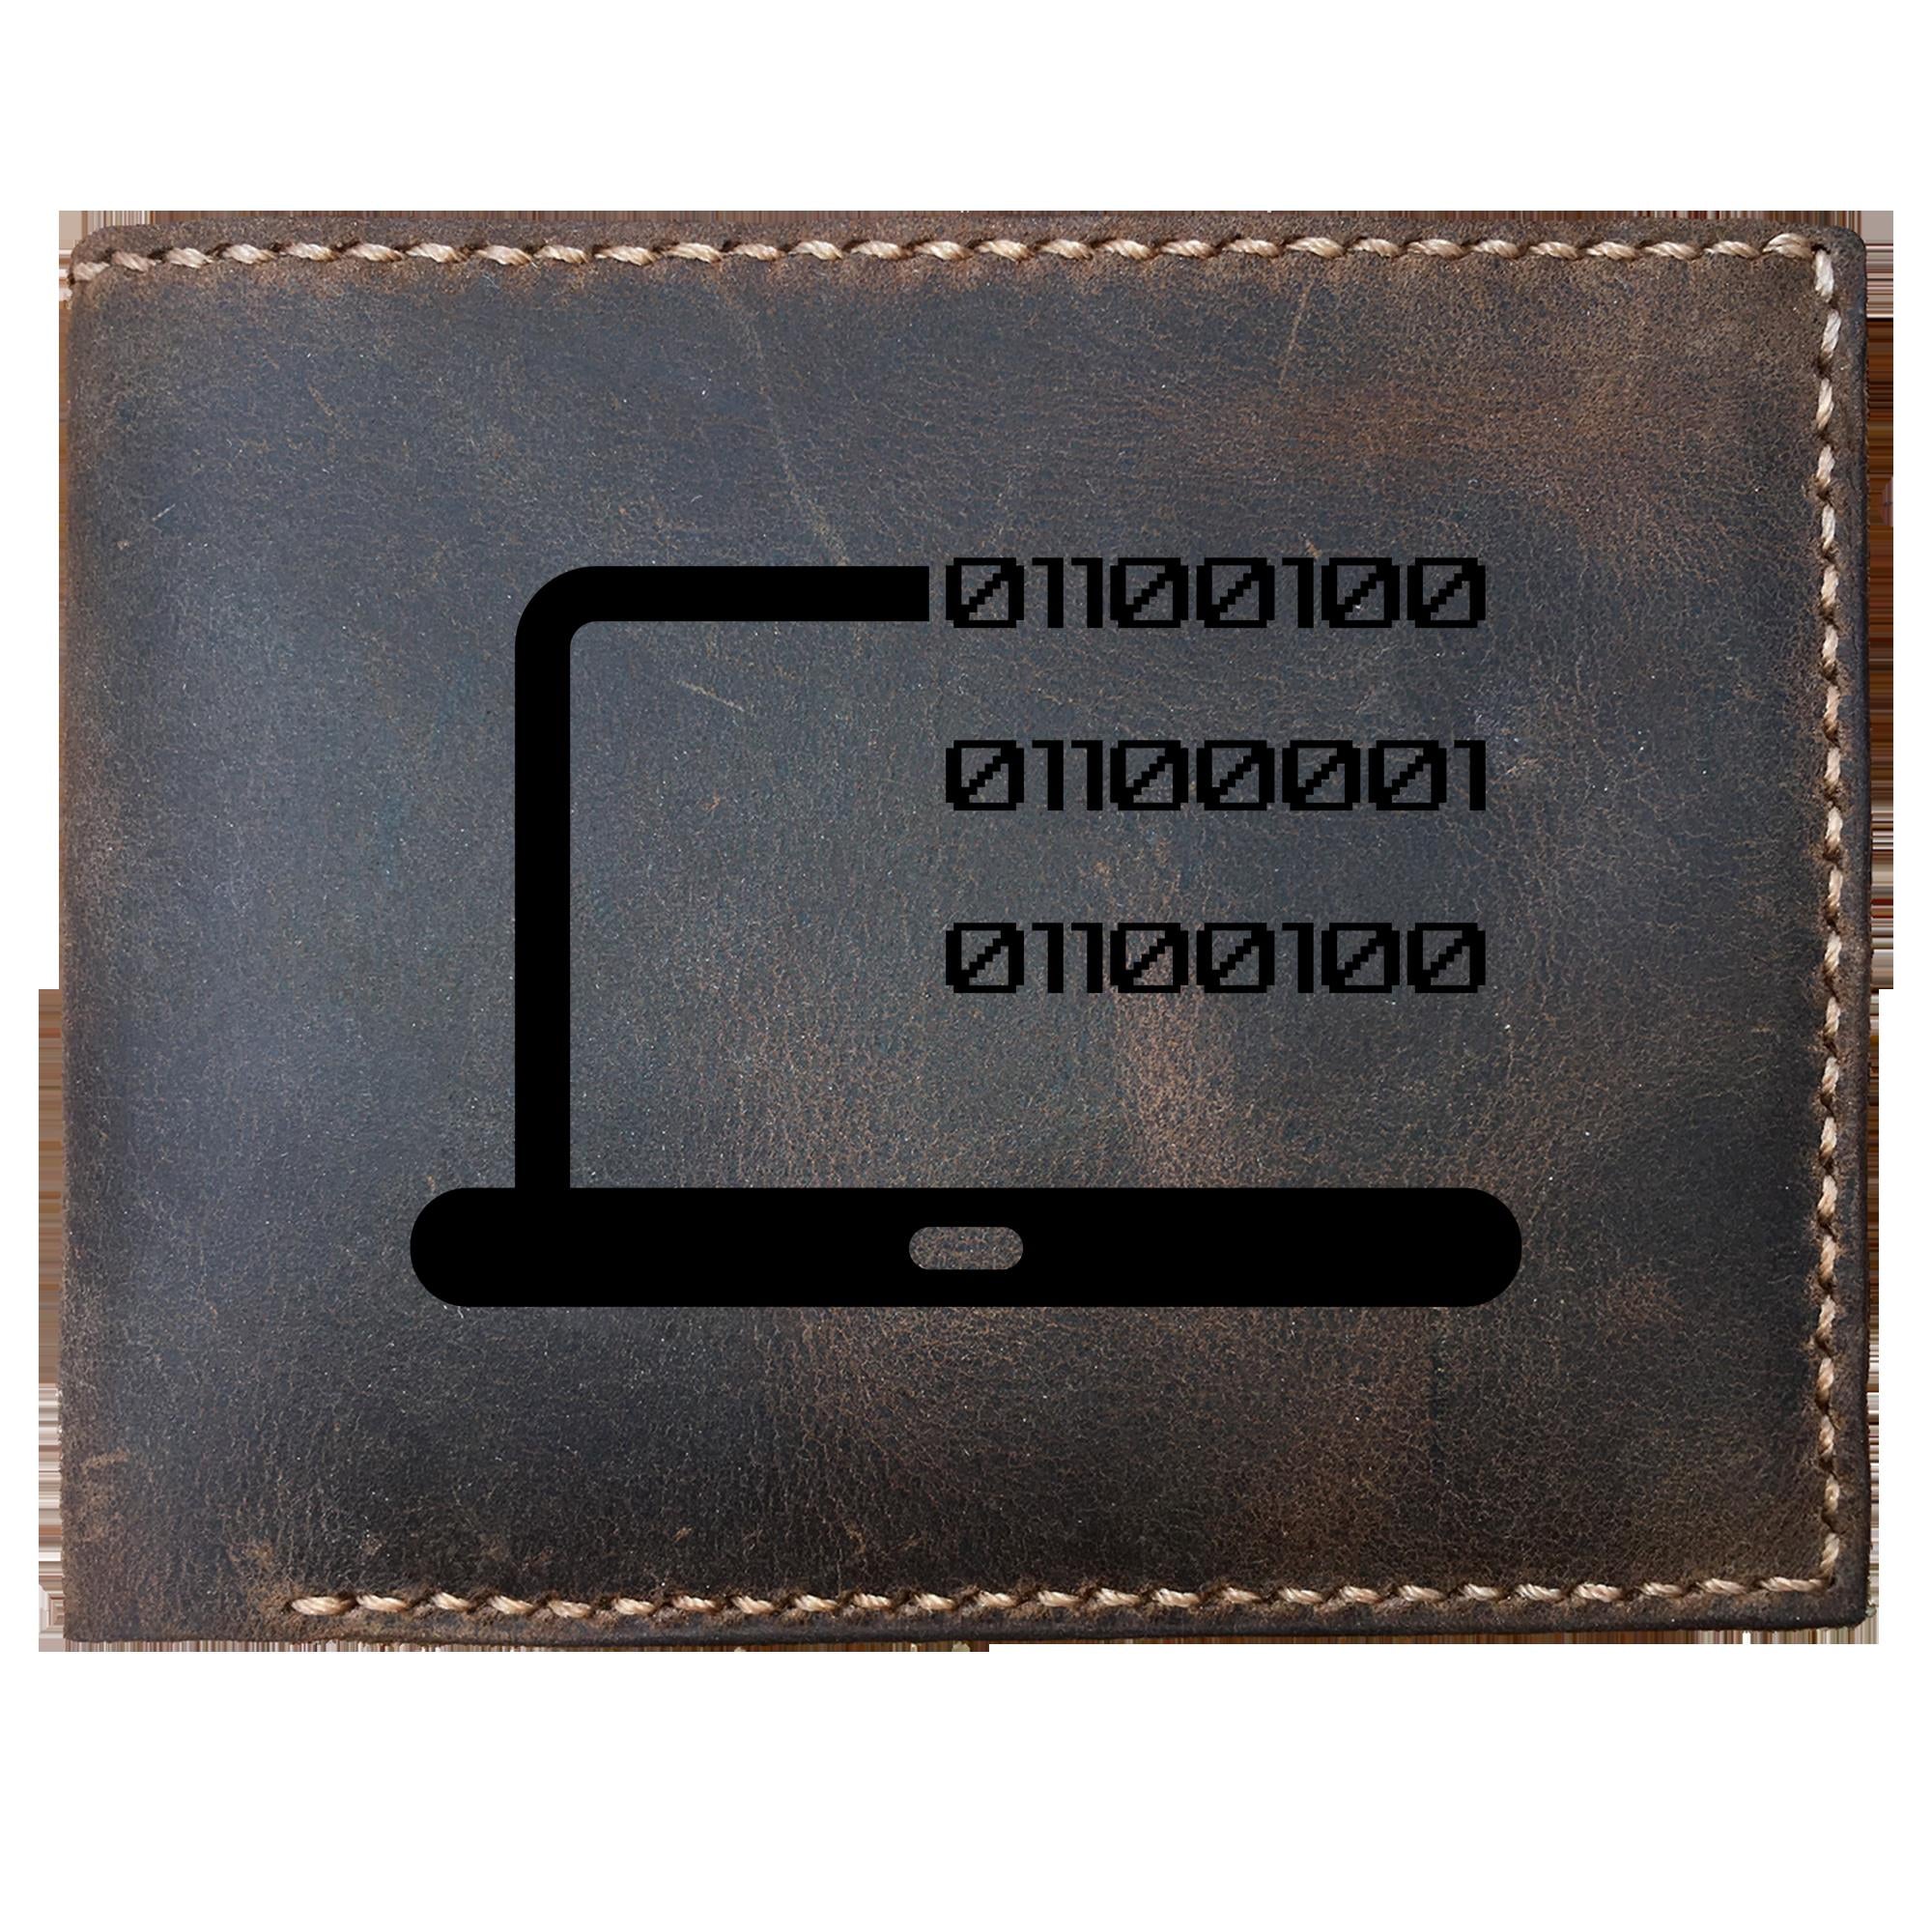 Skitongifts Funny Custom Laser Engraved Bifold Leather Wallet For Men, Dad In Binary Code,Programmer,Developers,Coder,Coding,Fathers